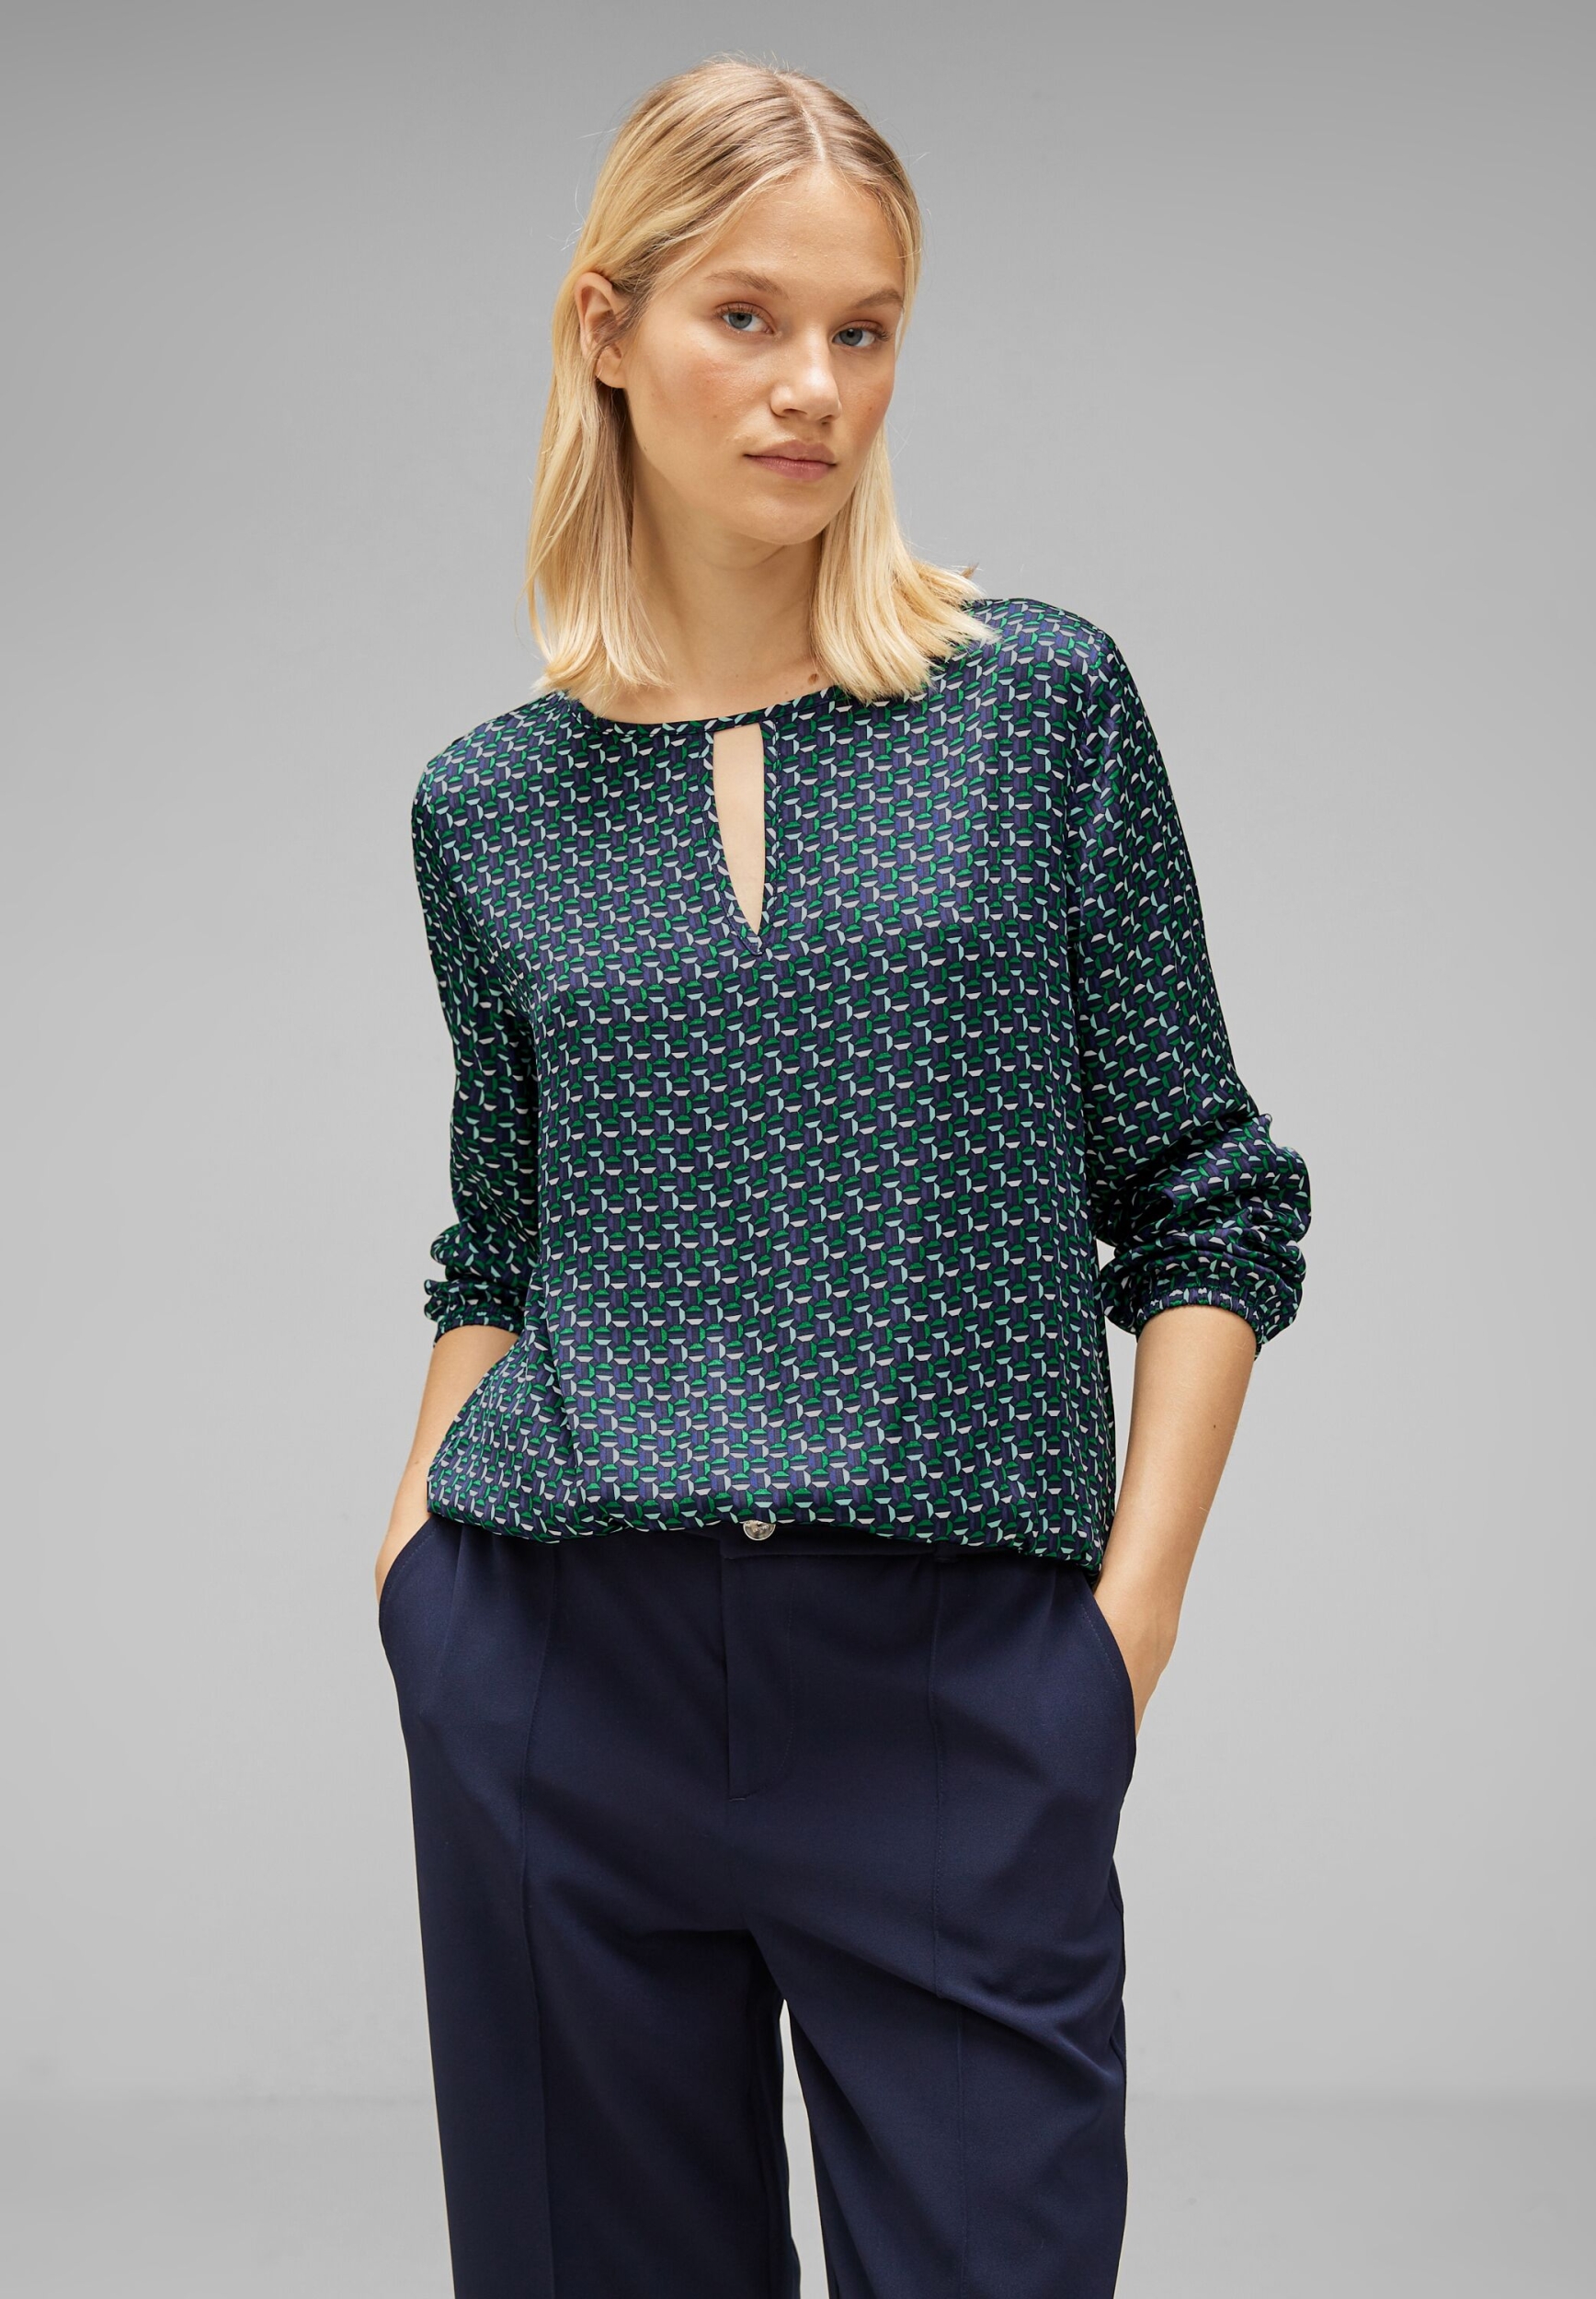 Printed satinblouse w cut out | 40 | gentle green | A344194-35245-40 | V-Shirts